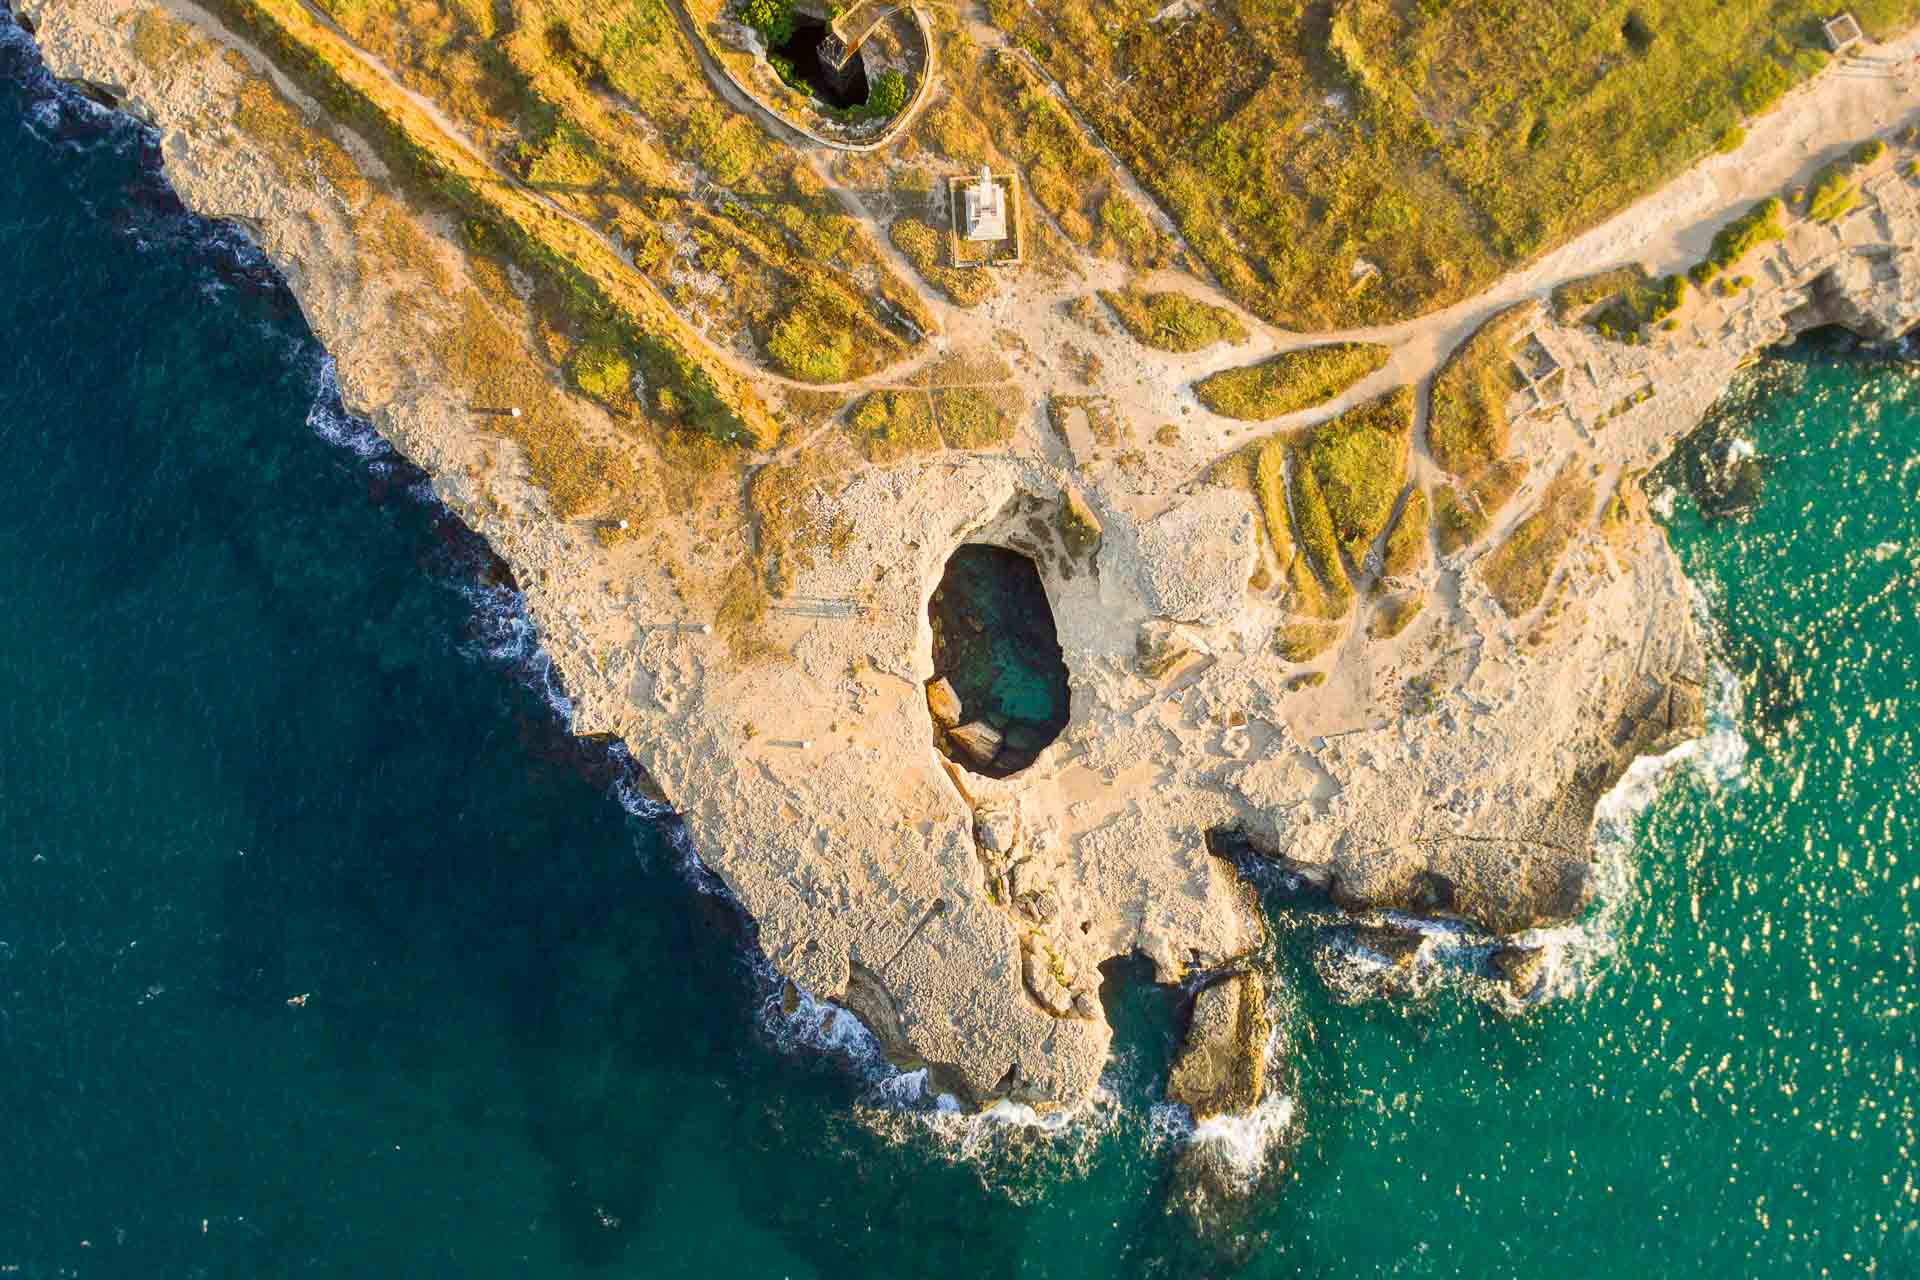 Aerial shot of the Grotta della poesia, a hole in the floor surrounded by the sea